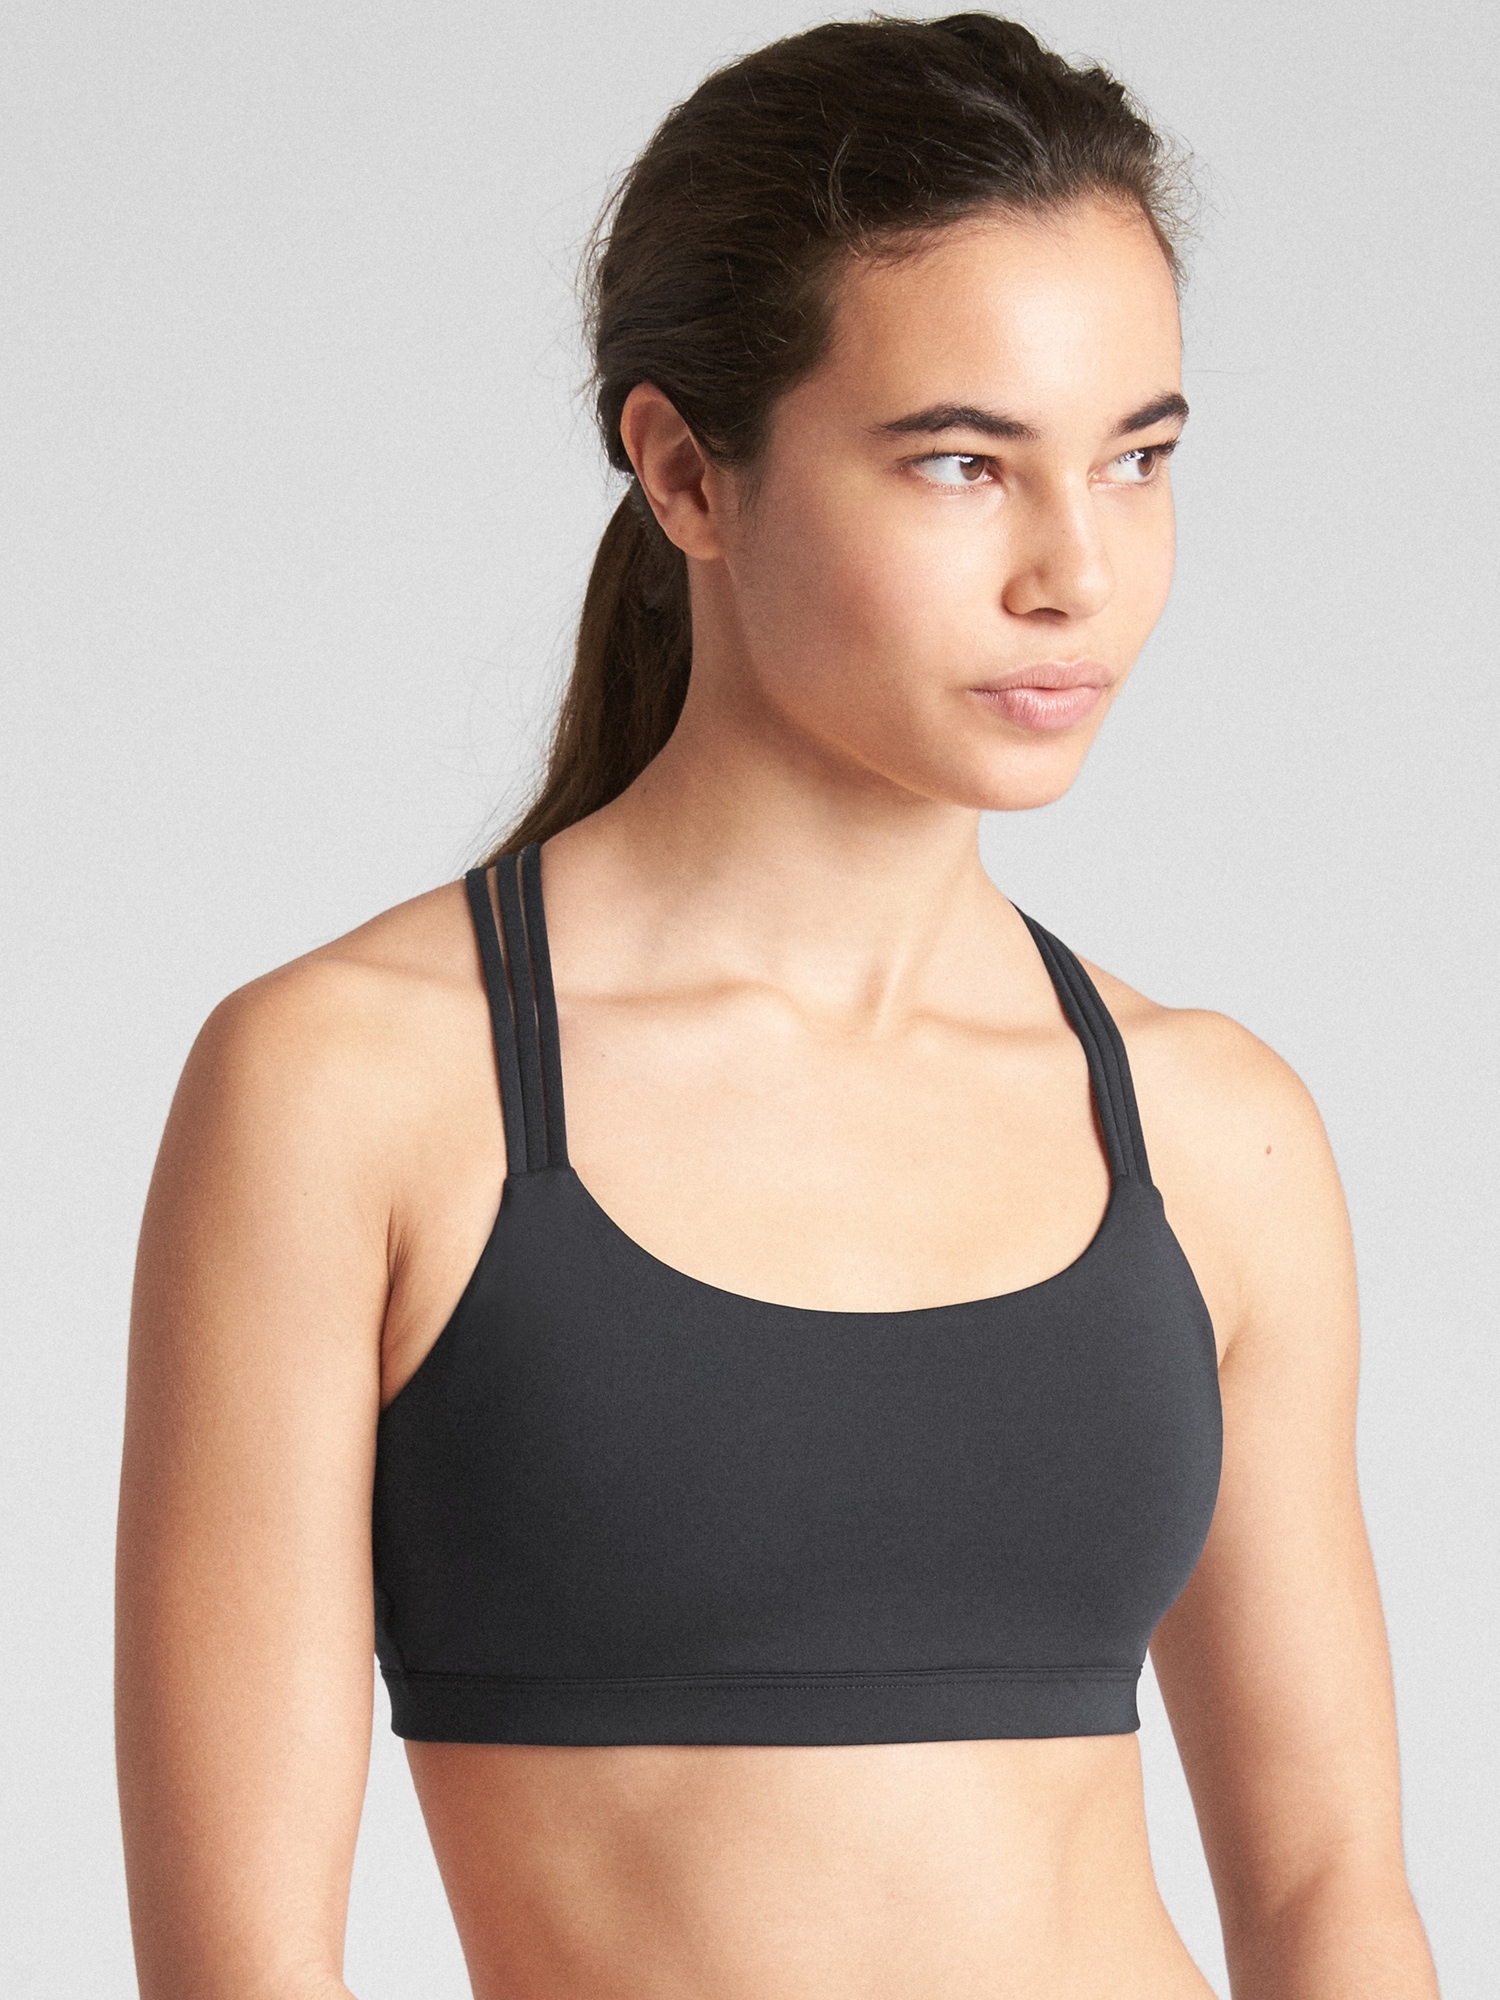 25 HQ Pictures Gap Sports Bra Review : Top 4 Best Sports Bra For Crossfit Large Breast Reviews